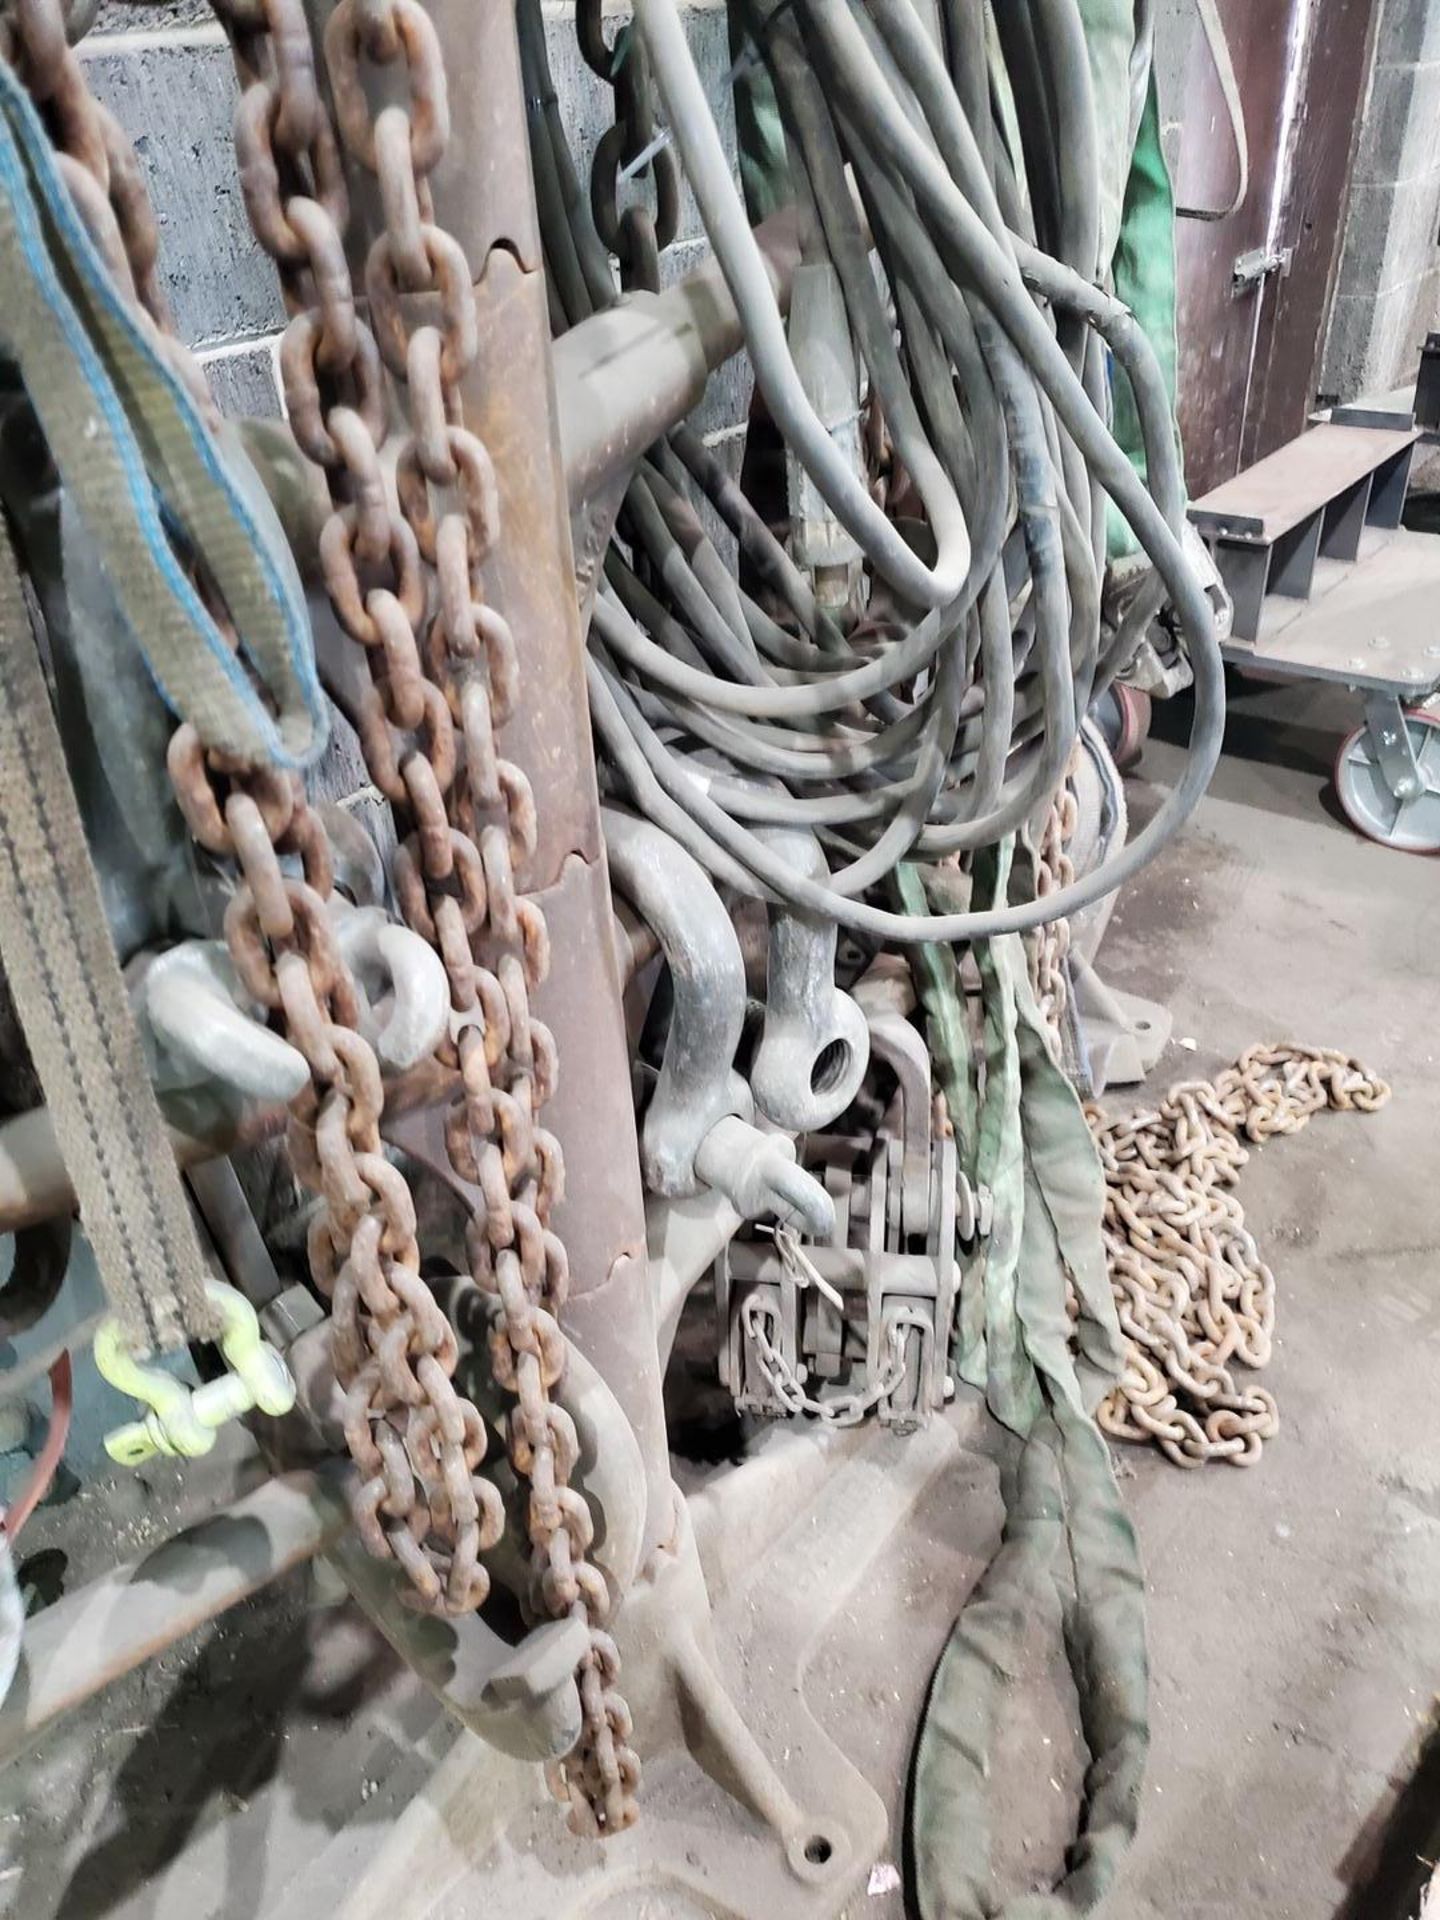 Assorted Lifting Material To Include But Not Limited To: Harnesses, Straps, Chains, Shackles, - Image 4 of 10